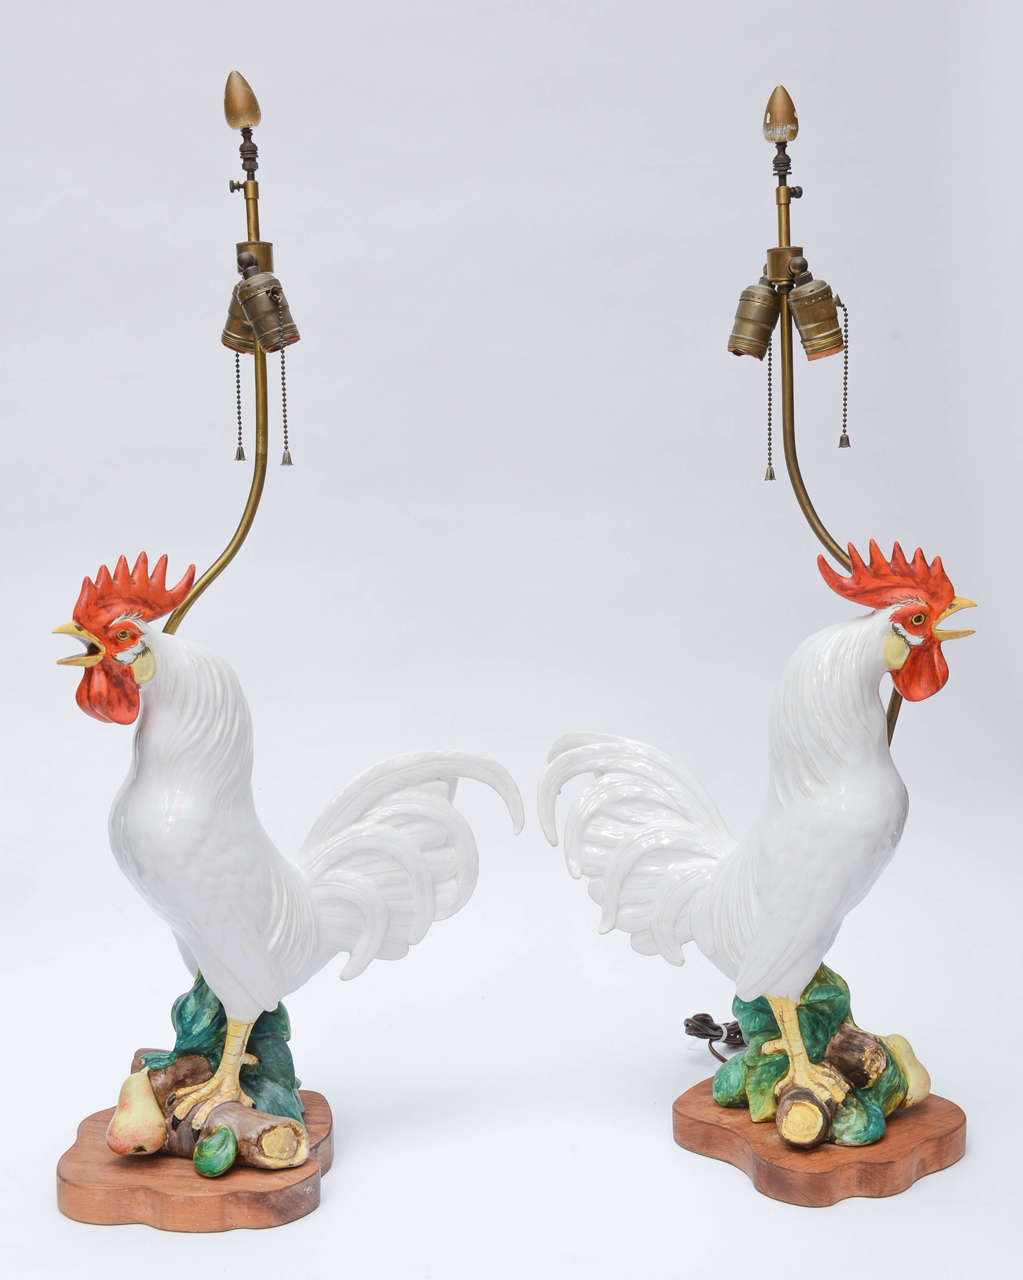 Fabulous pair of large painted Italian ceramic rooster lamps on wood bases. (Sold with out shades)